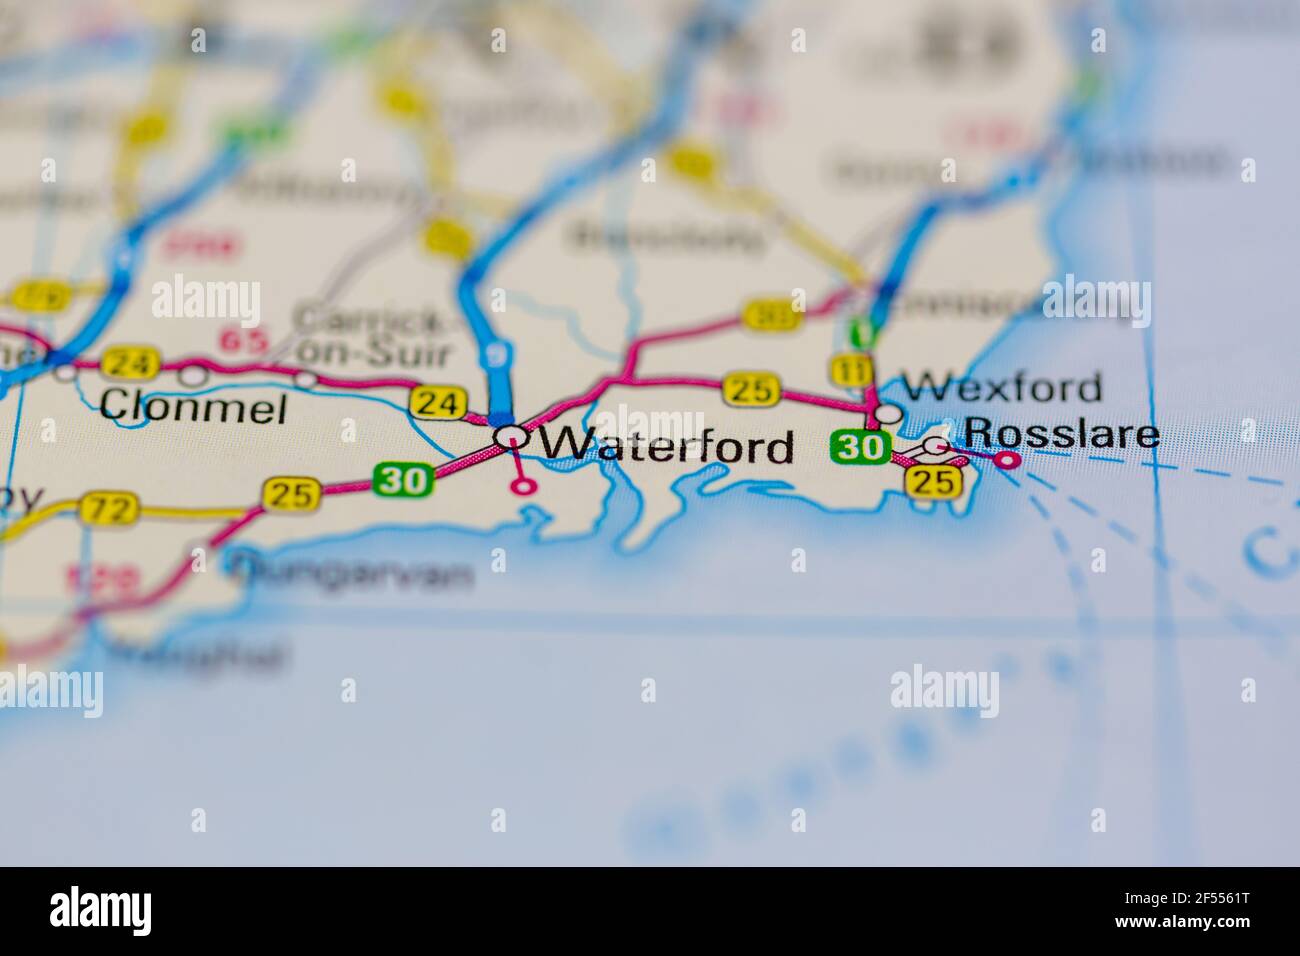 Waterford Shown on a Geography map or road map Stock Photo